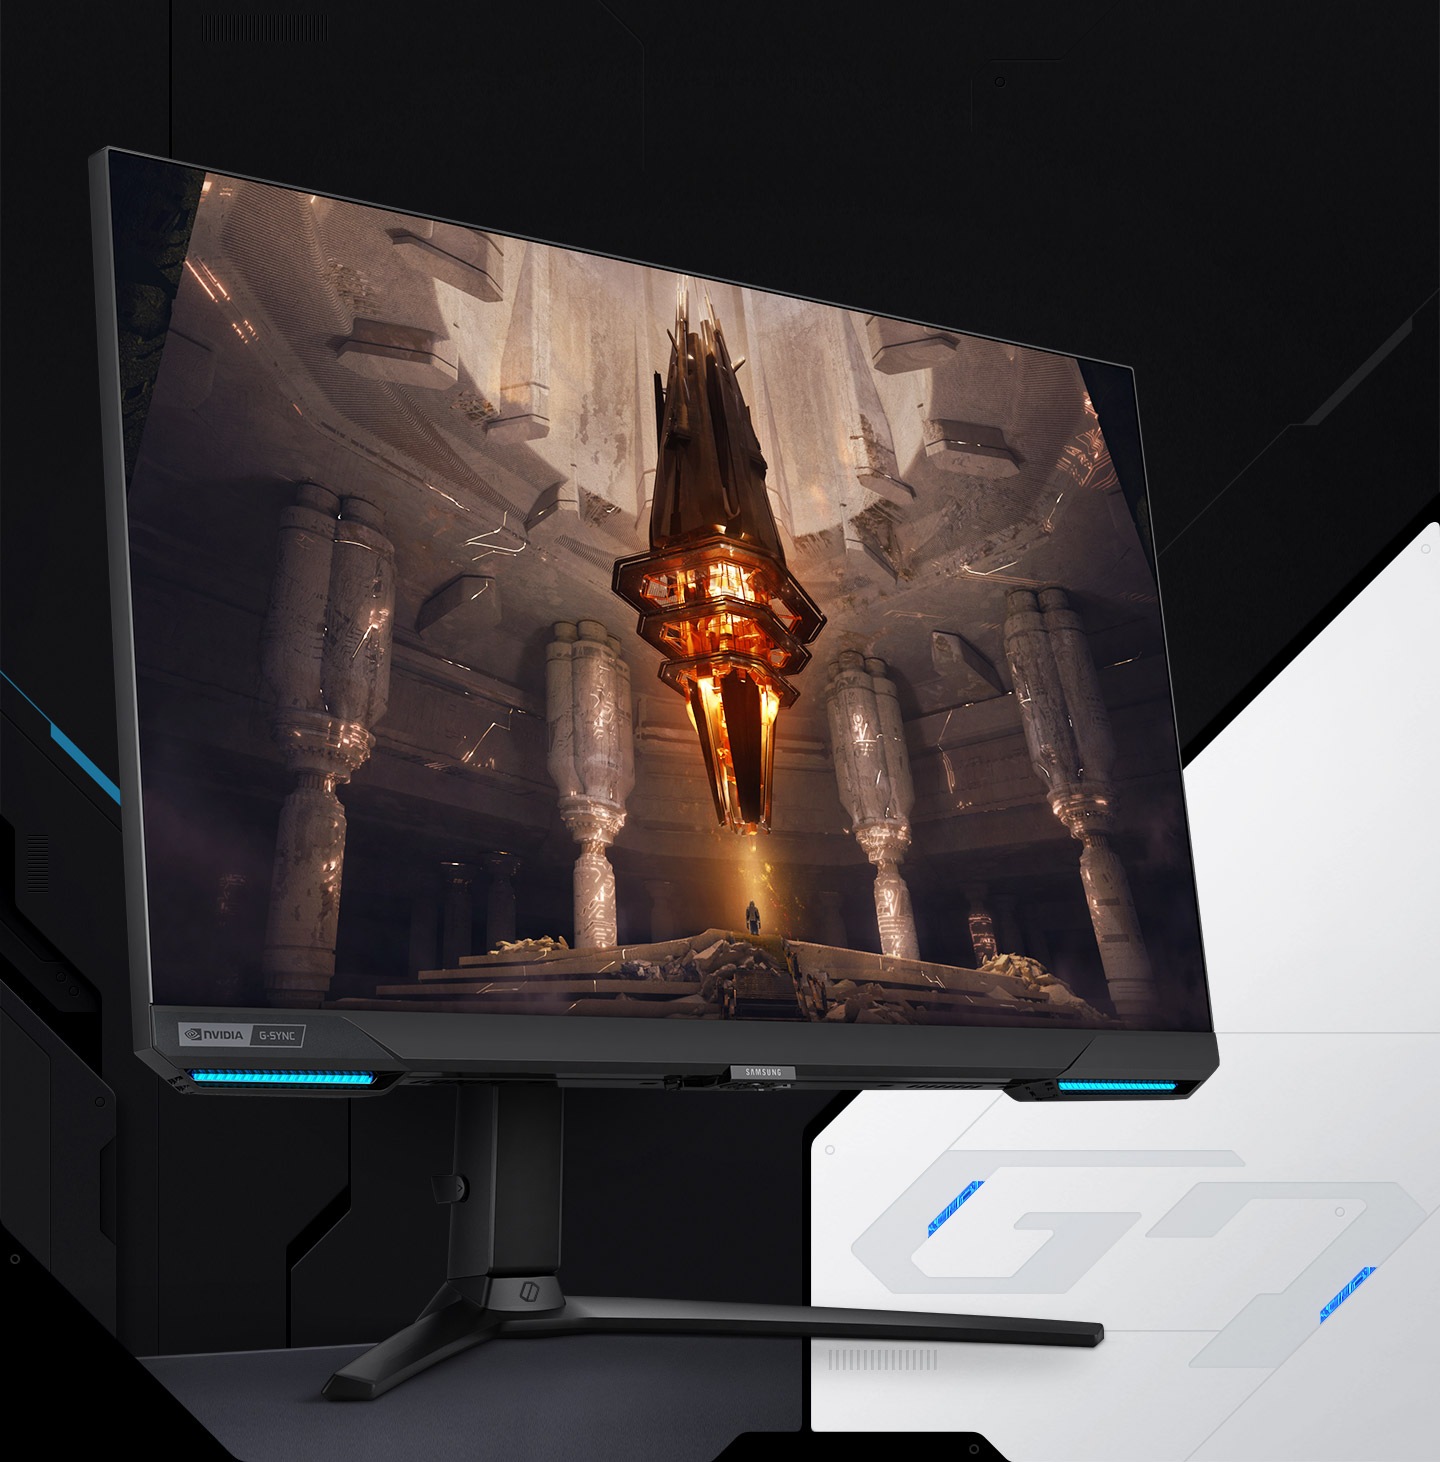 On the monitor display is a orange rocket ship with light emitting from its engine exhausts inside an underground cave. The rocket ship is set to launch out of the opening above, and surrounded by stone pillars and steps. G7 logo is placed on the right side of the monitor stand.